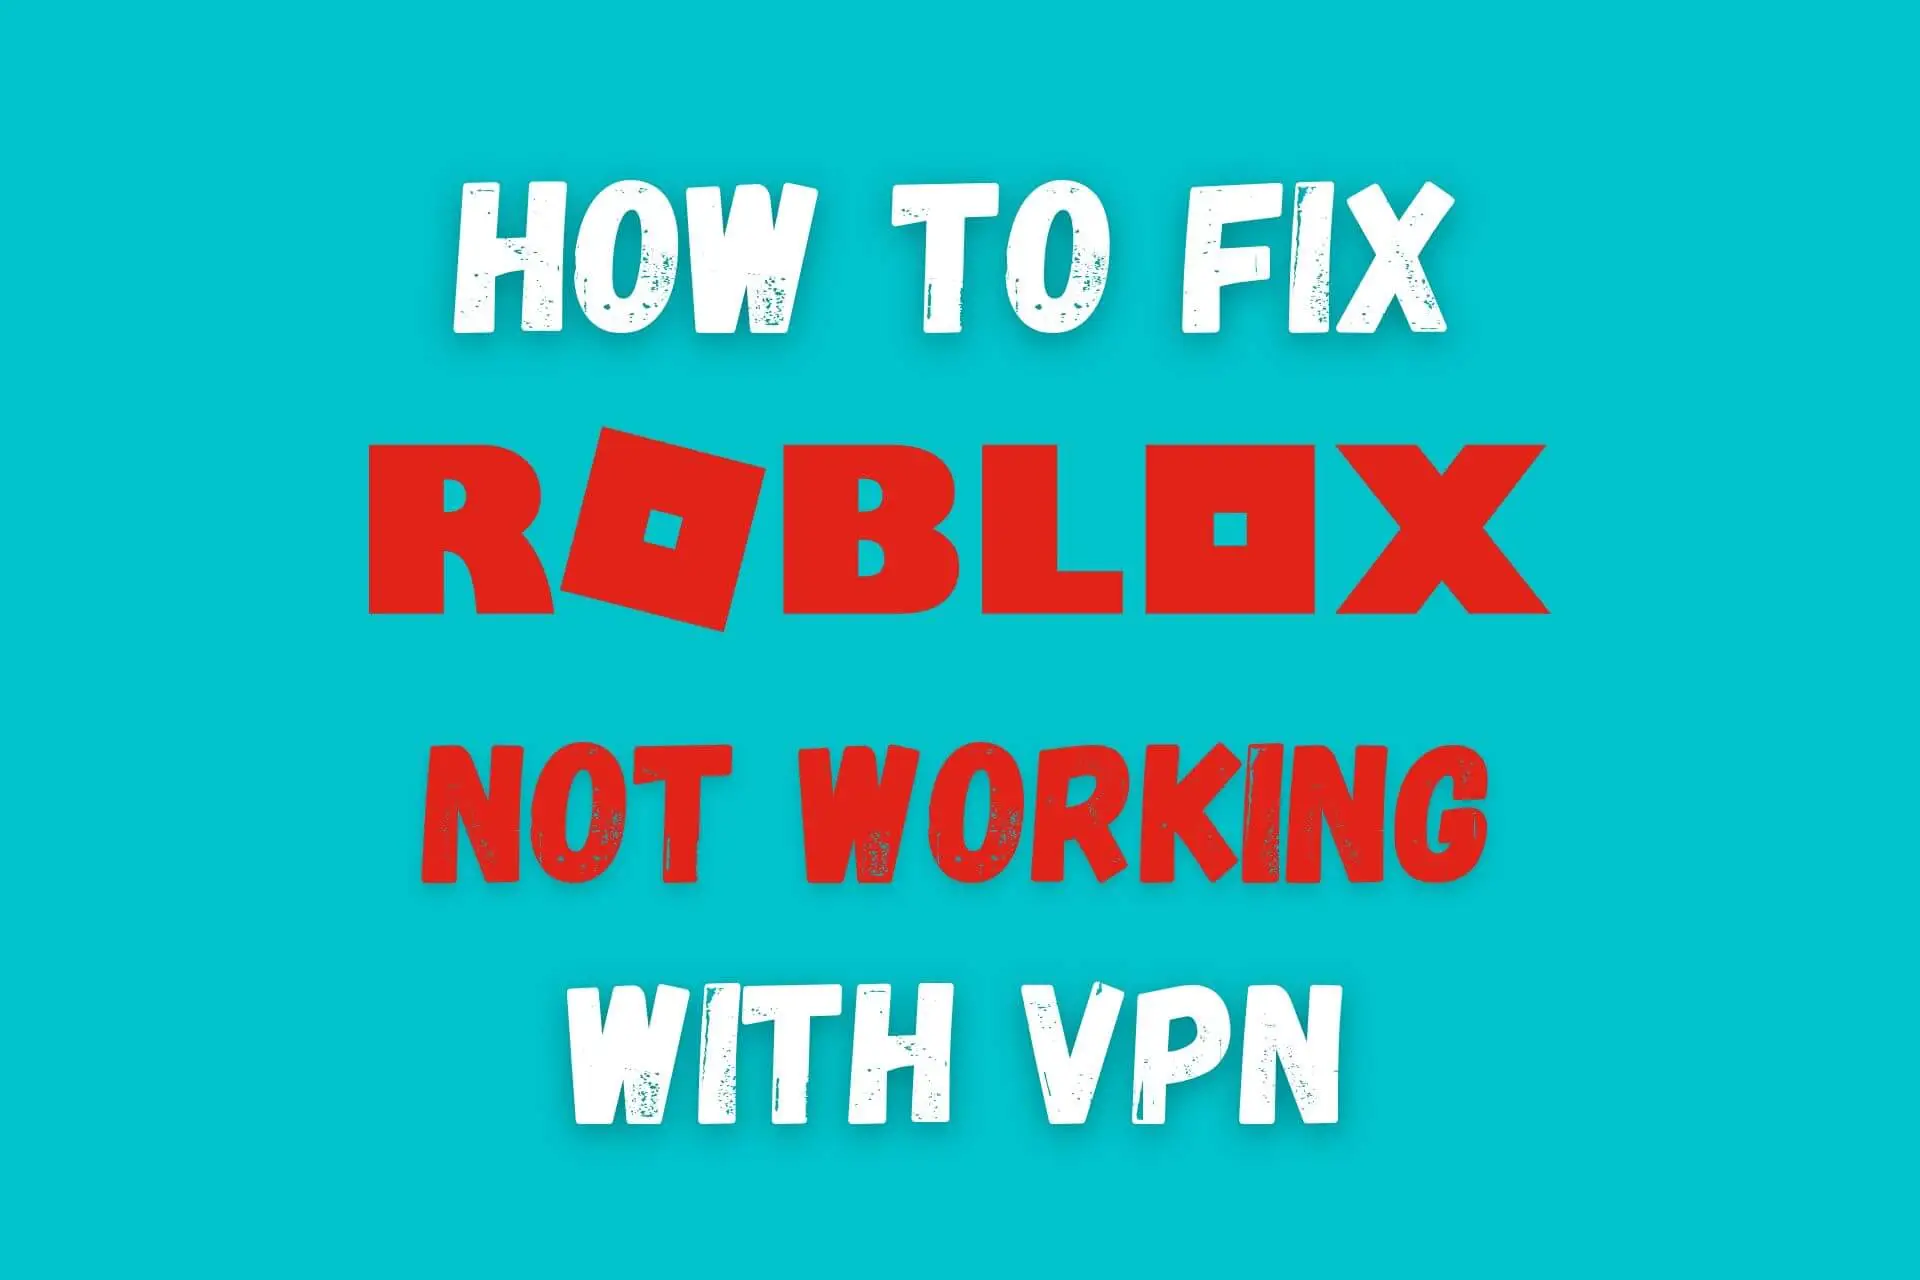 roblox not working with vpn